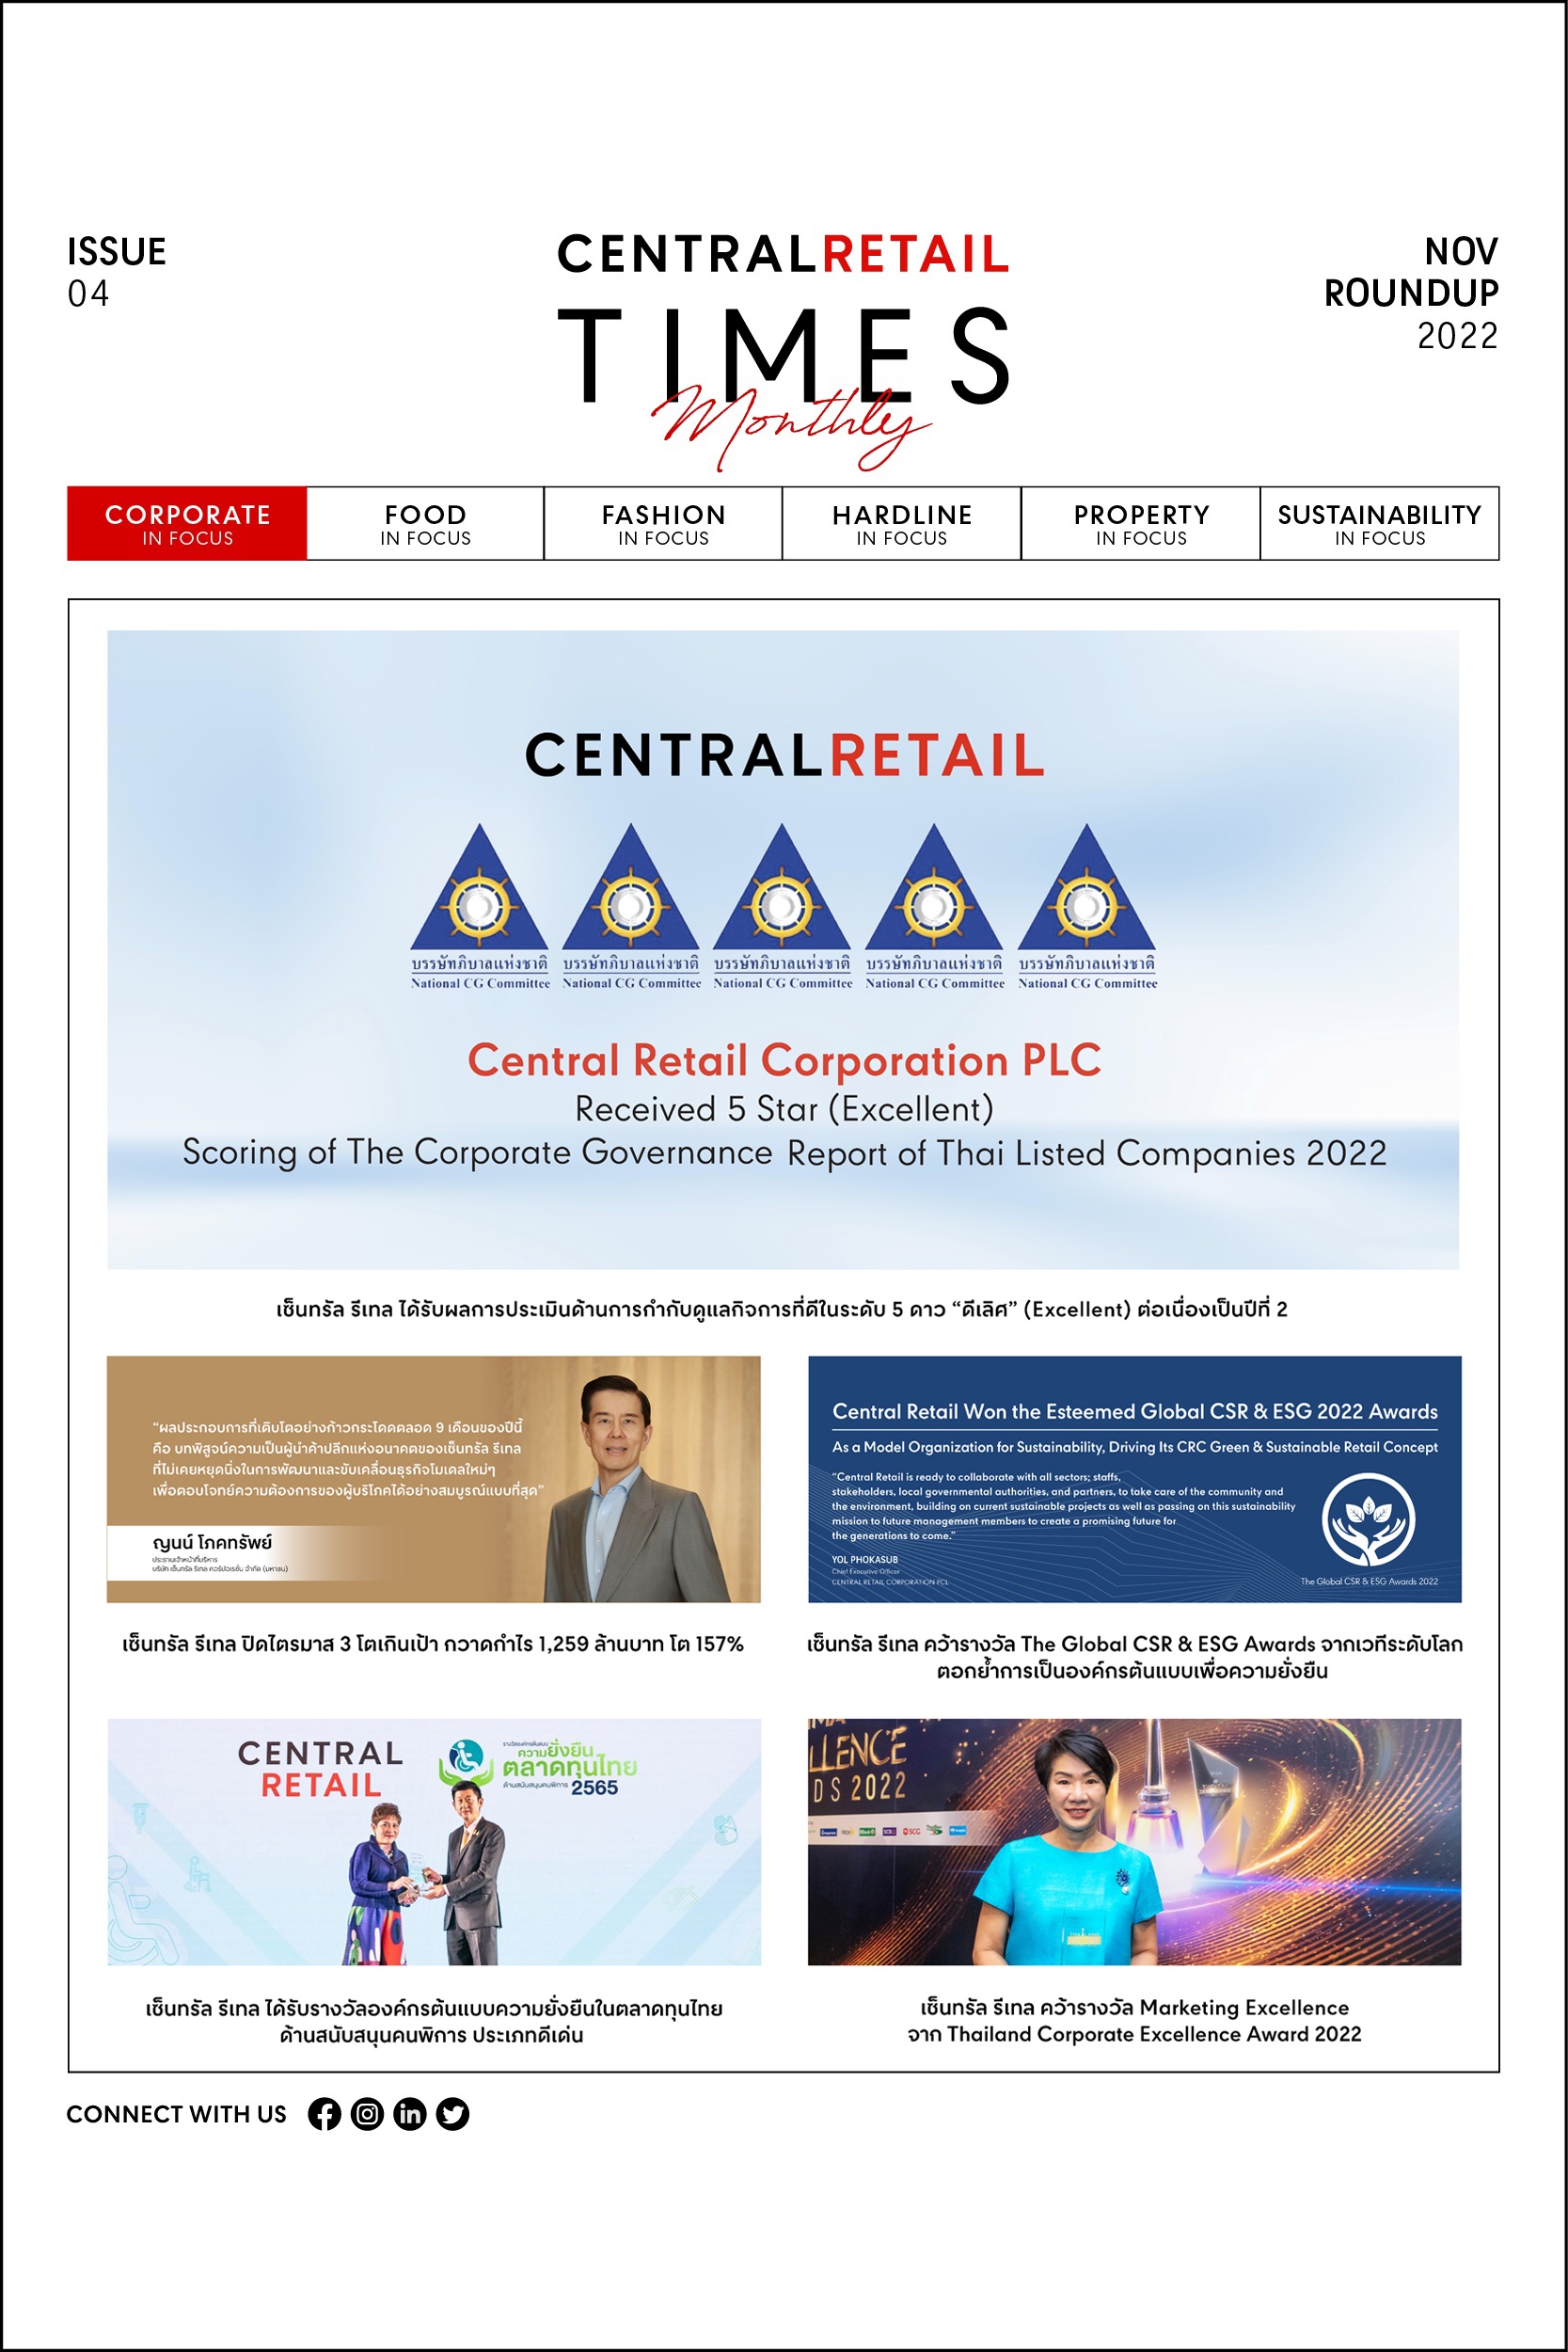 CENTRAL RETAIL TIMES Monthly November Issue